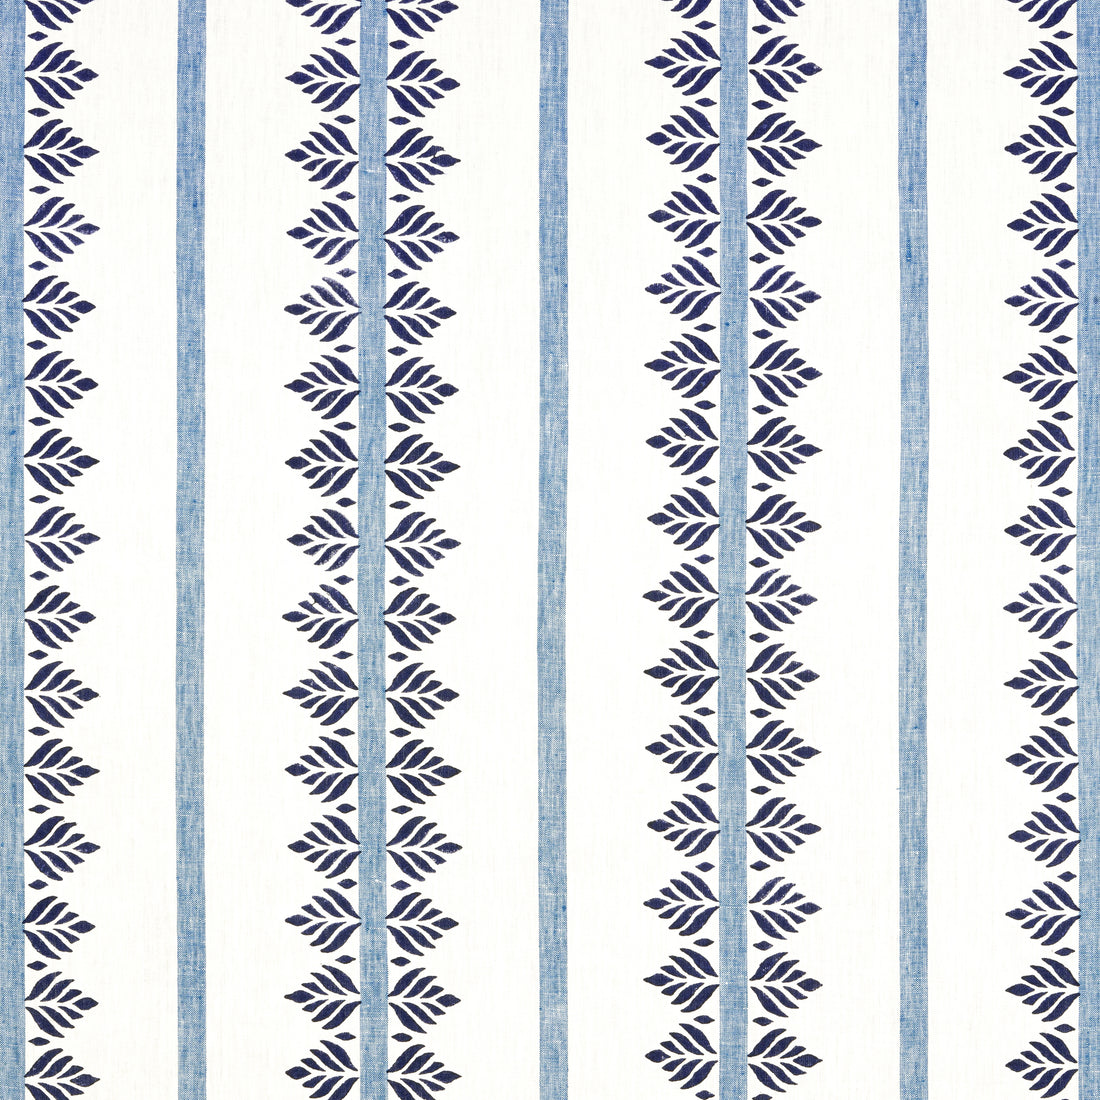 Fern Stripe fabric in navy color - pattern number AF15101 - by Anna French in the Antilles collection